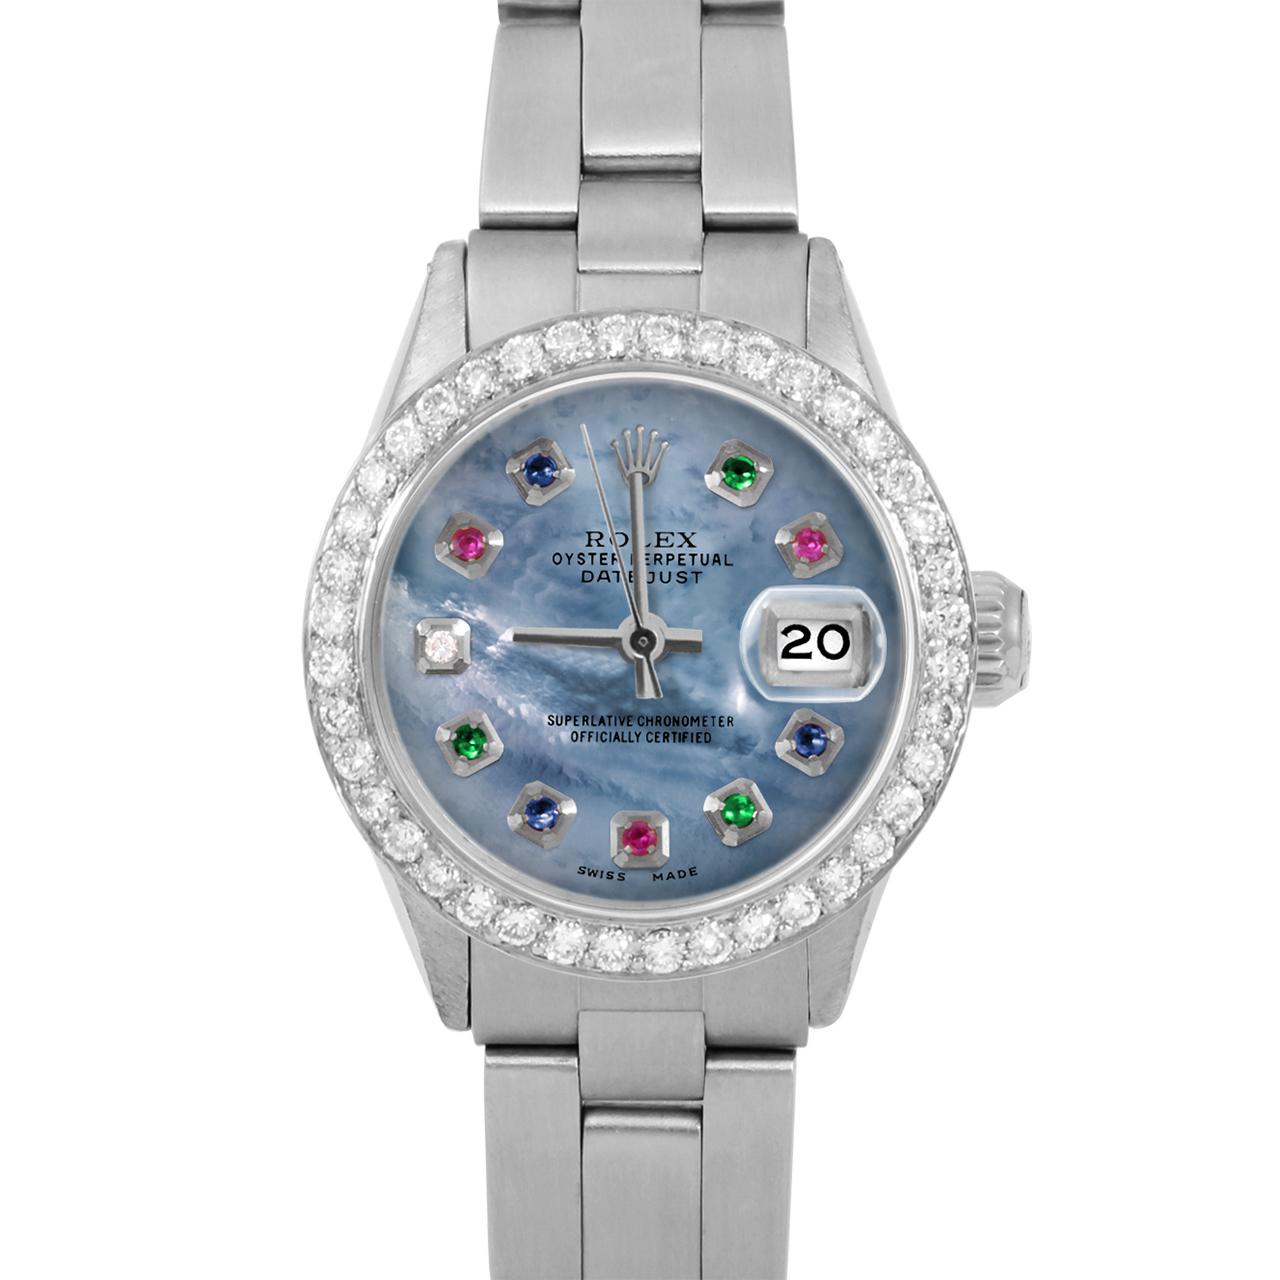 Brand : Rolex
Model : Datejust (Non-Quickset Model)
Gender : Ladies
Metals : Stainless Steel
Case Size : 24 mm

Dial : Custom Blue Mother Of Pearl Rainbow Emerald Ruby Sapphire Diamond Dial (This dial is not original Rolex And has been added